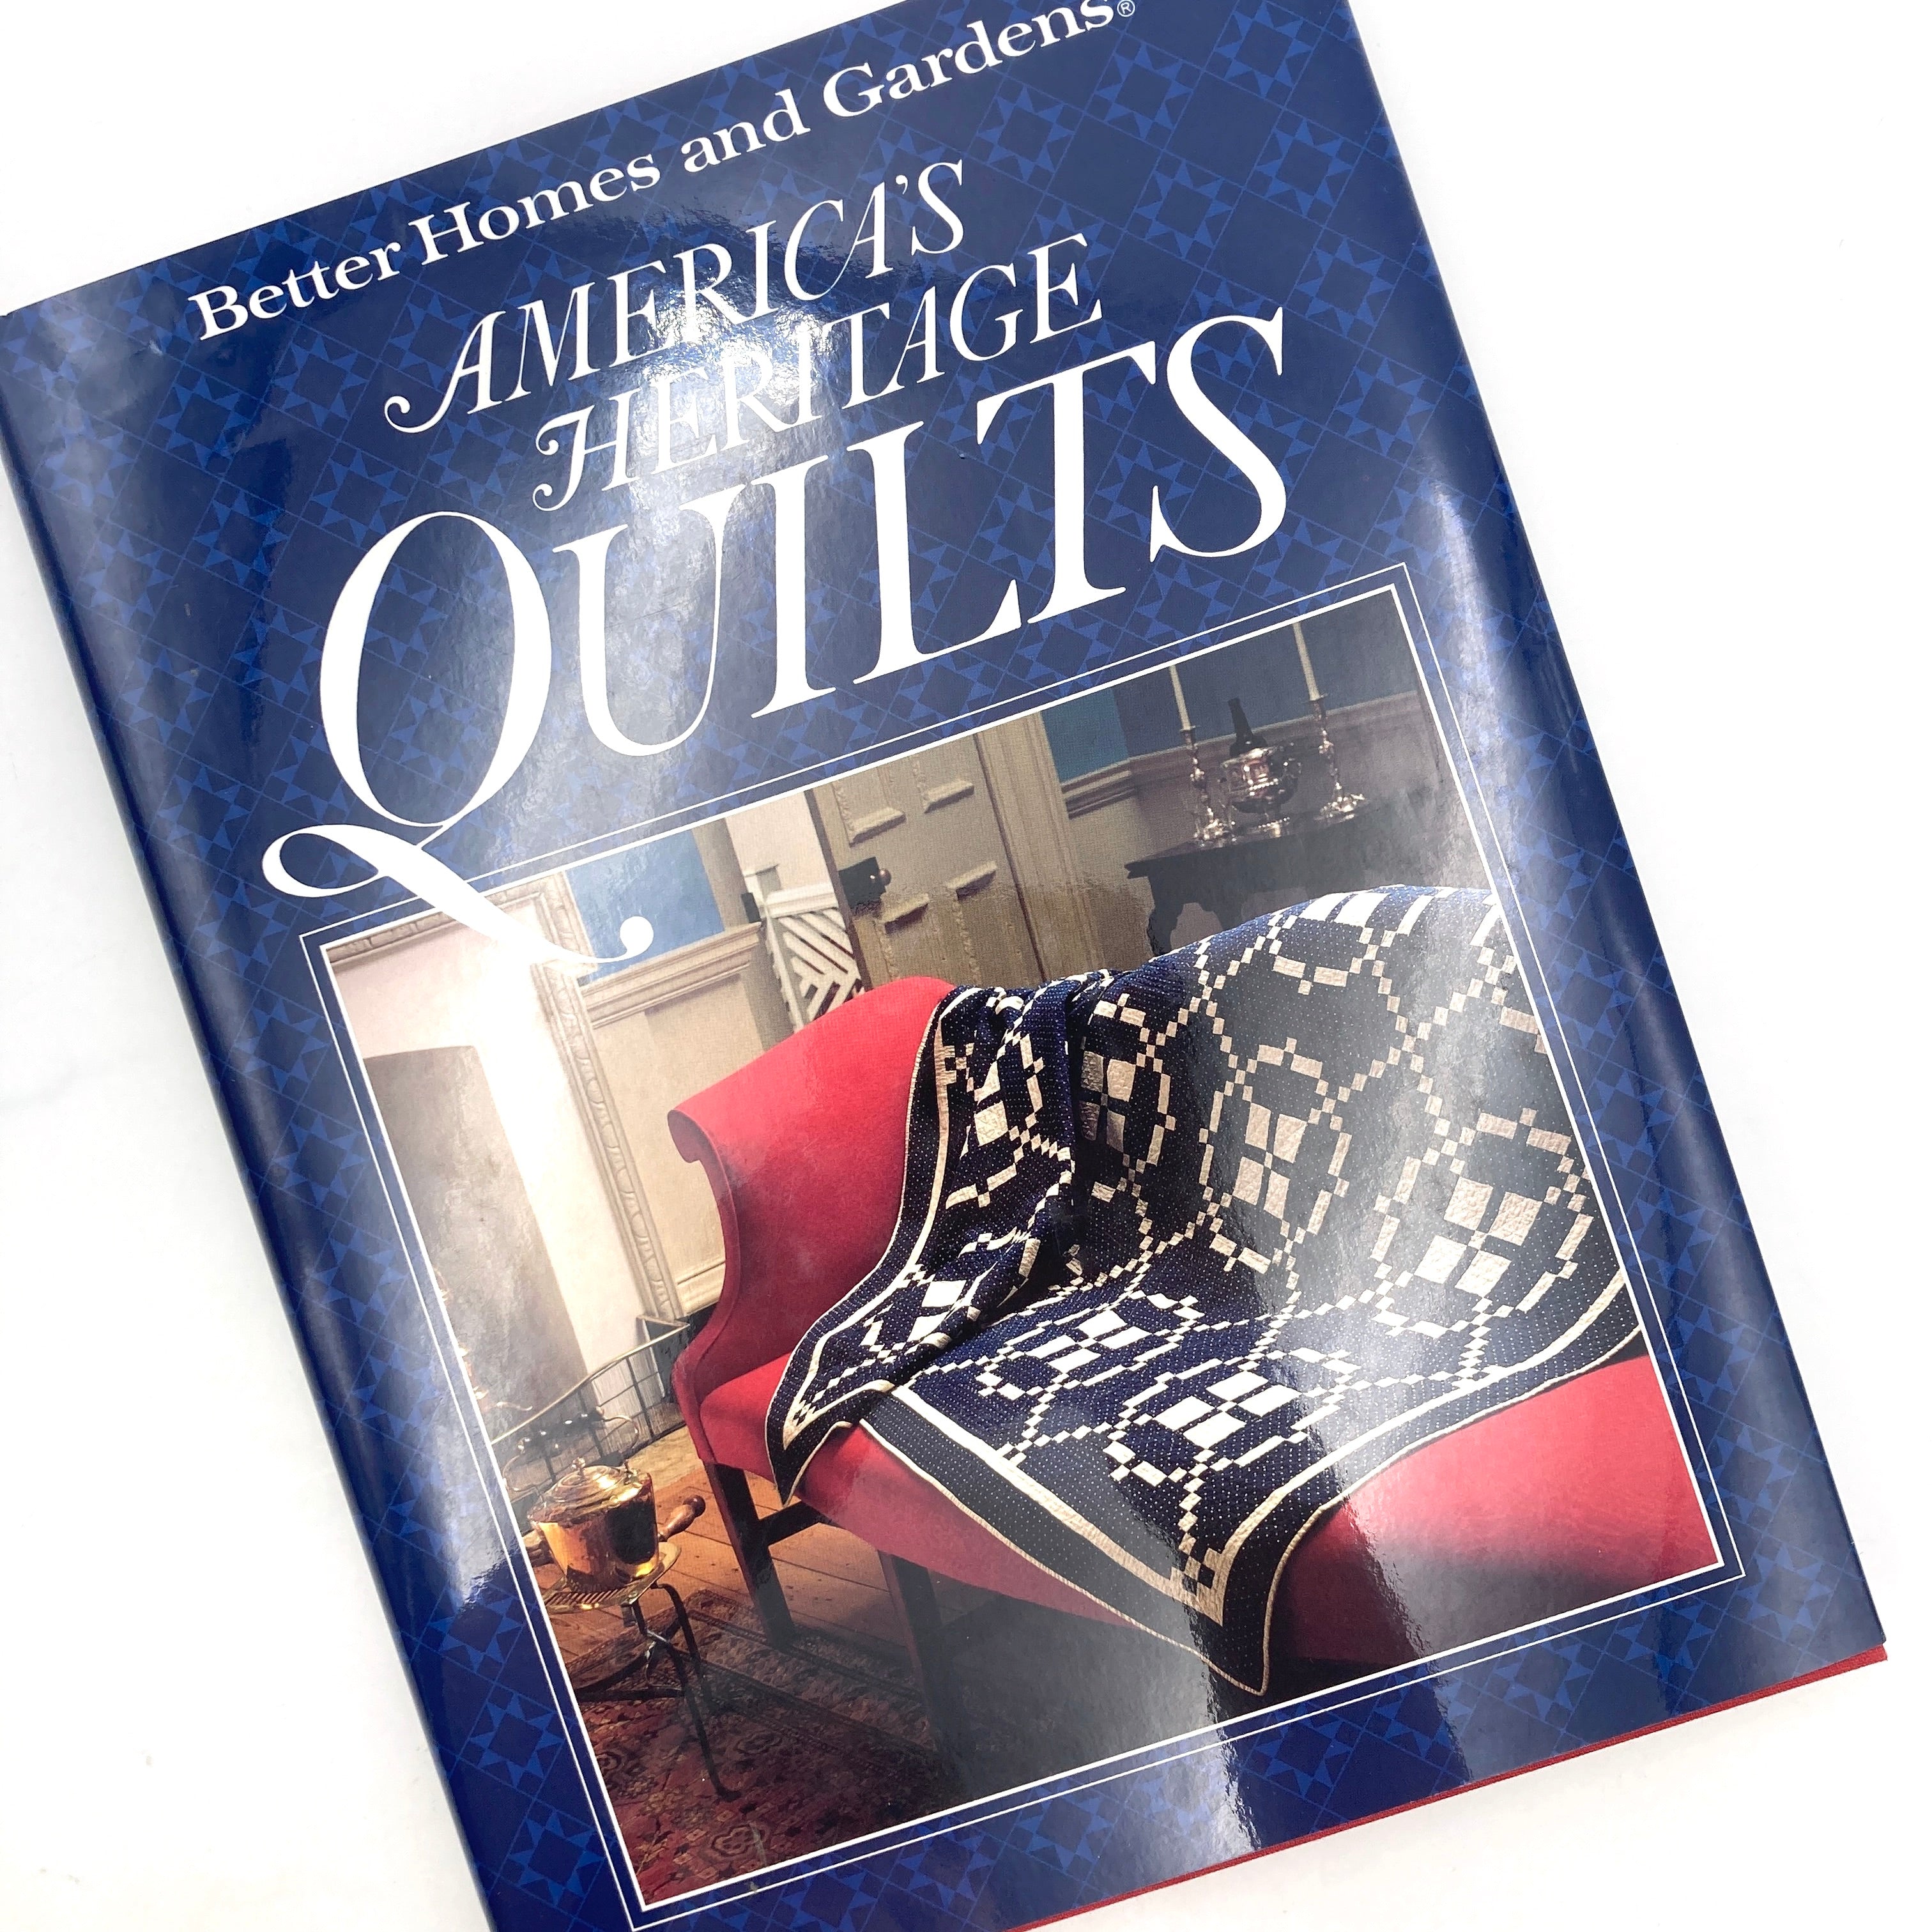 Modern Baby Quilts [Book]